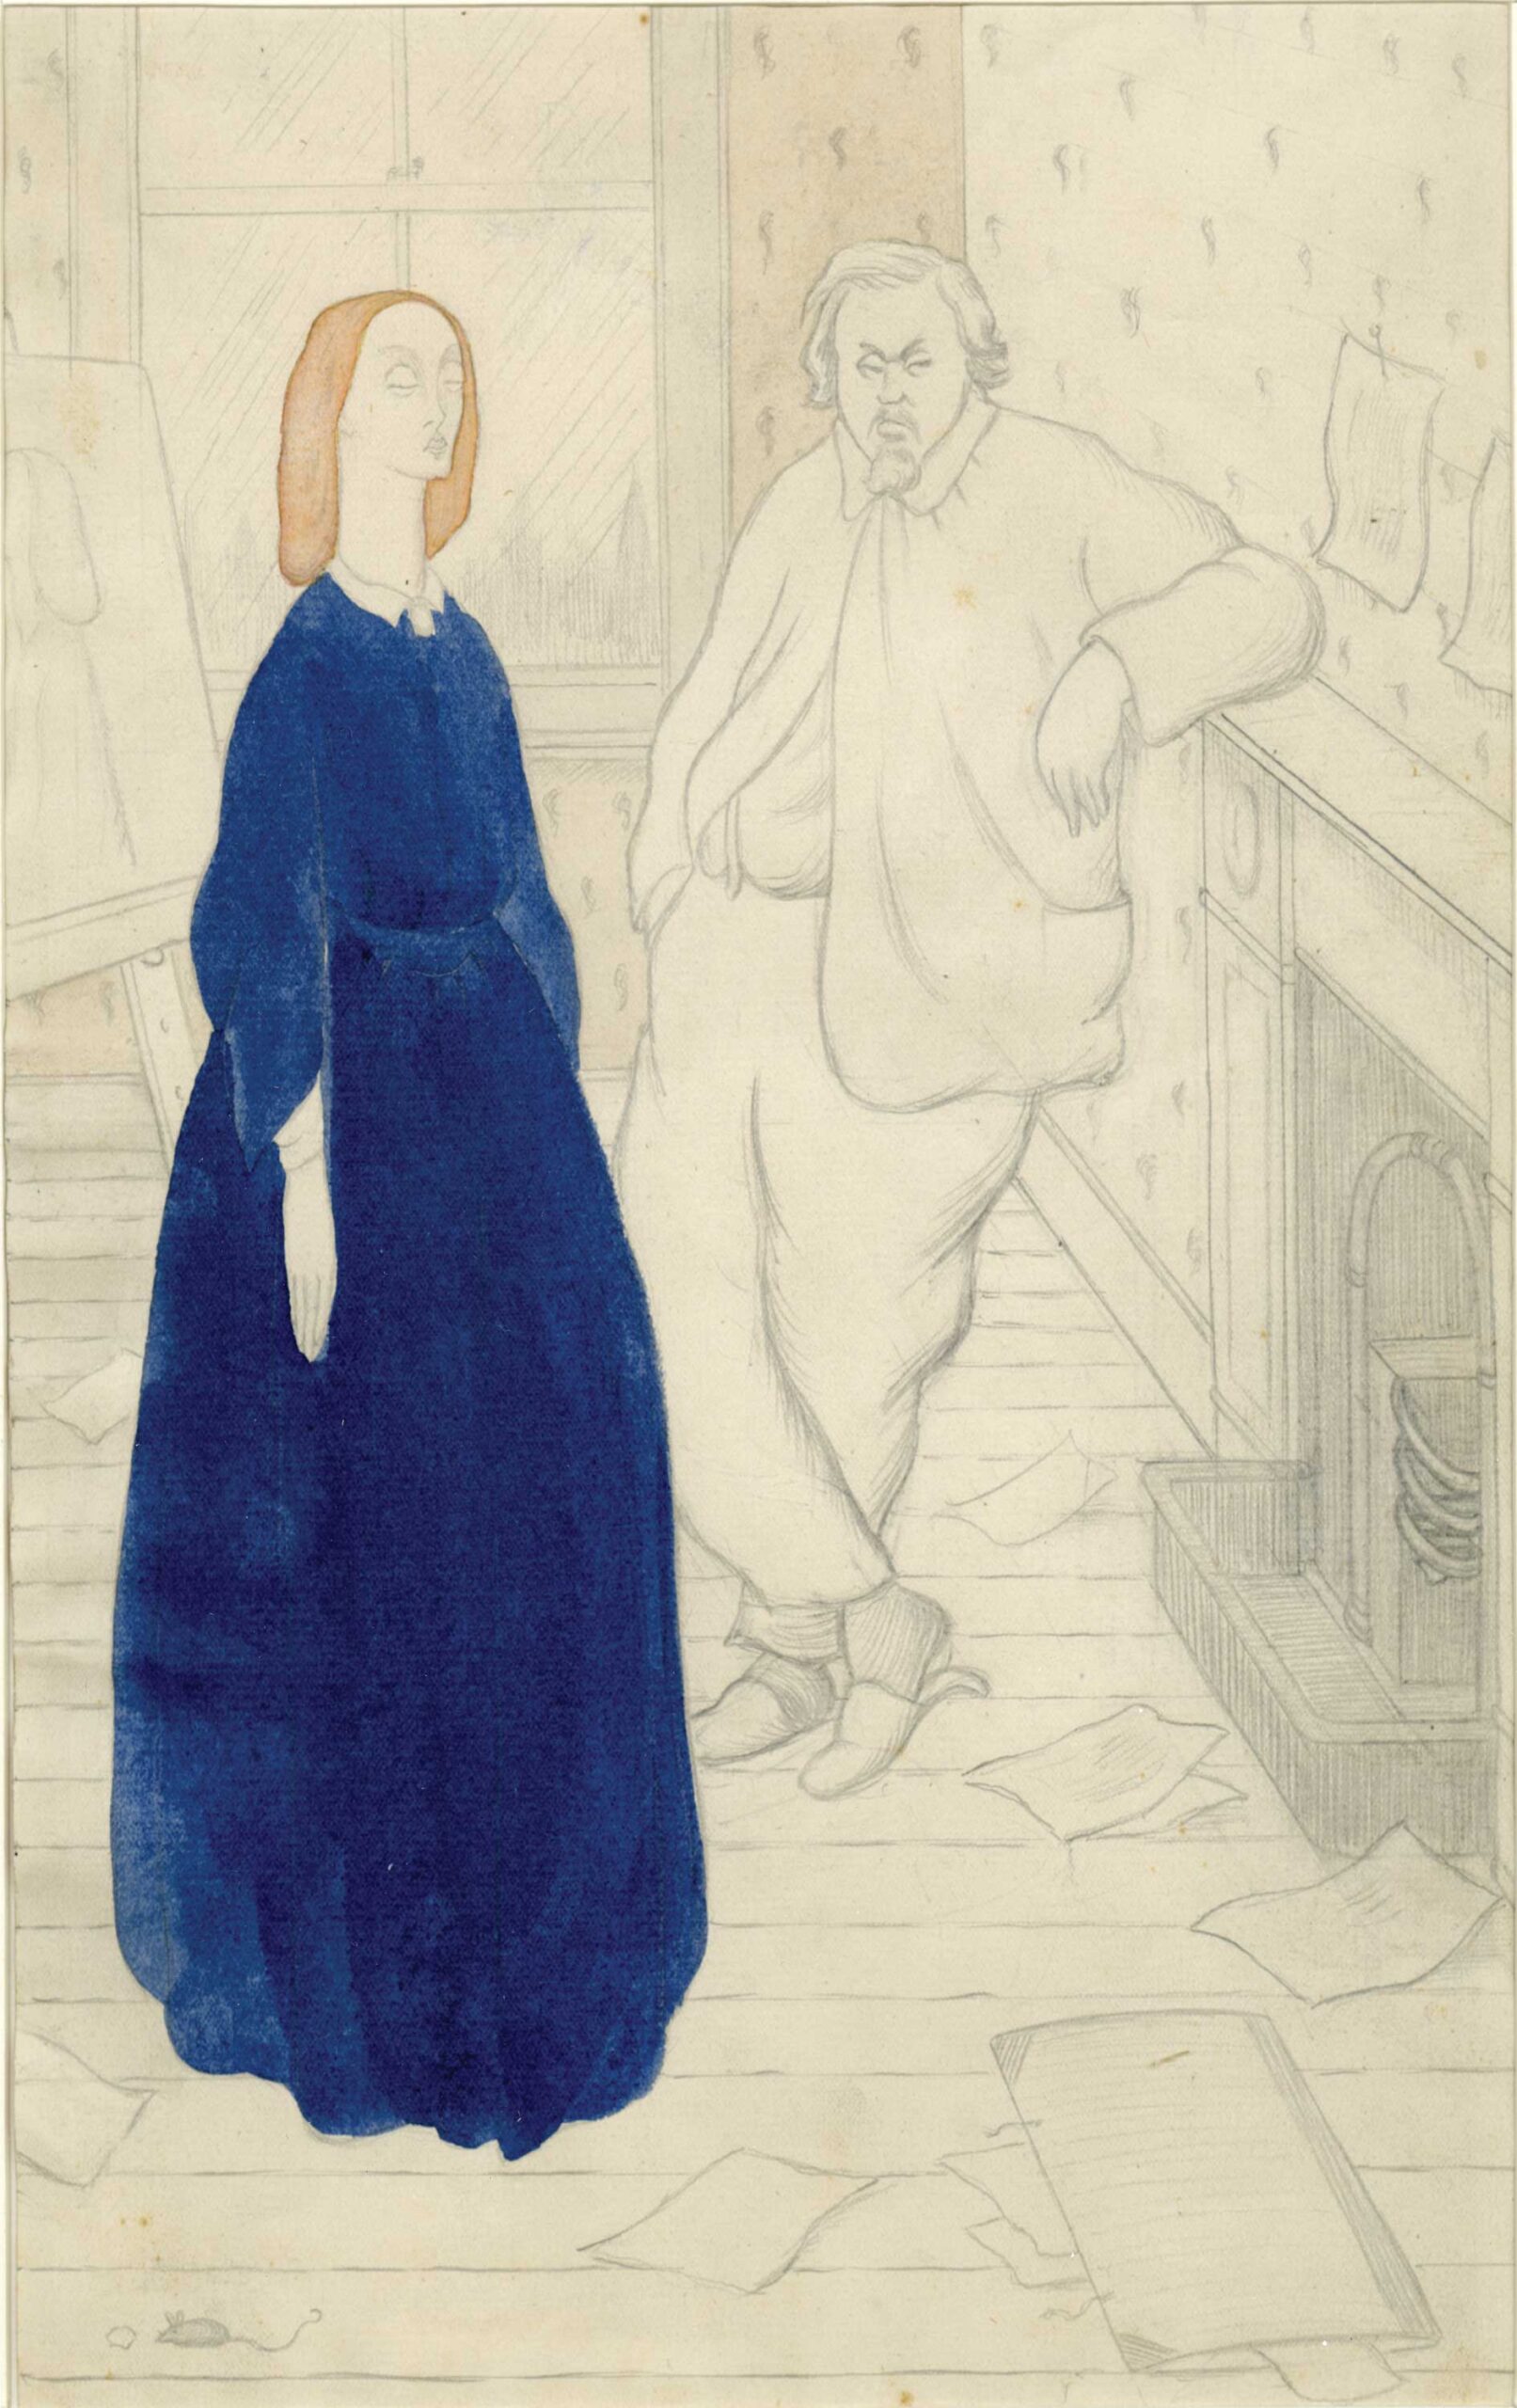 Max Beerbohm (1872–1956), "Rossetti’s Courtship," 1916–17, pencil and watercolor on paper, 12 3/4 x 8 1/3 in., Mark Samuels Lasner Collection, University of Delaware Library, Museums & Press